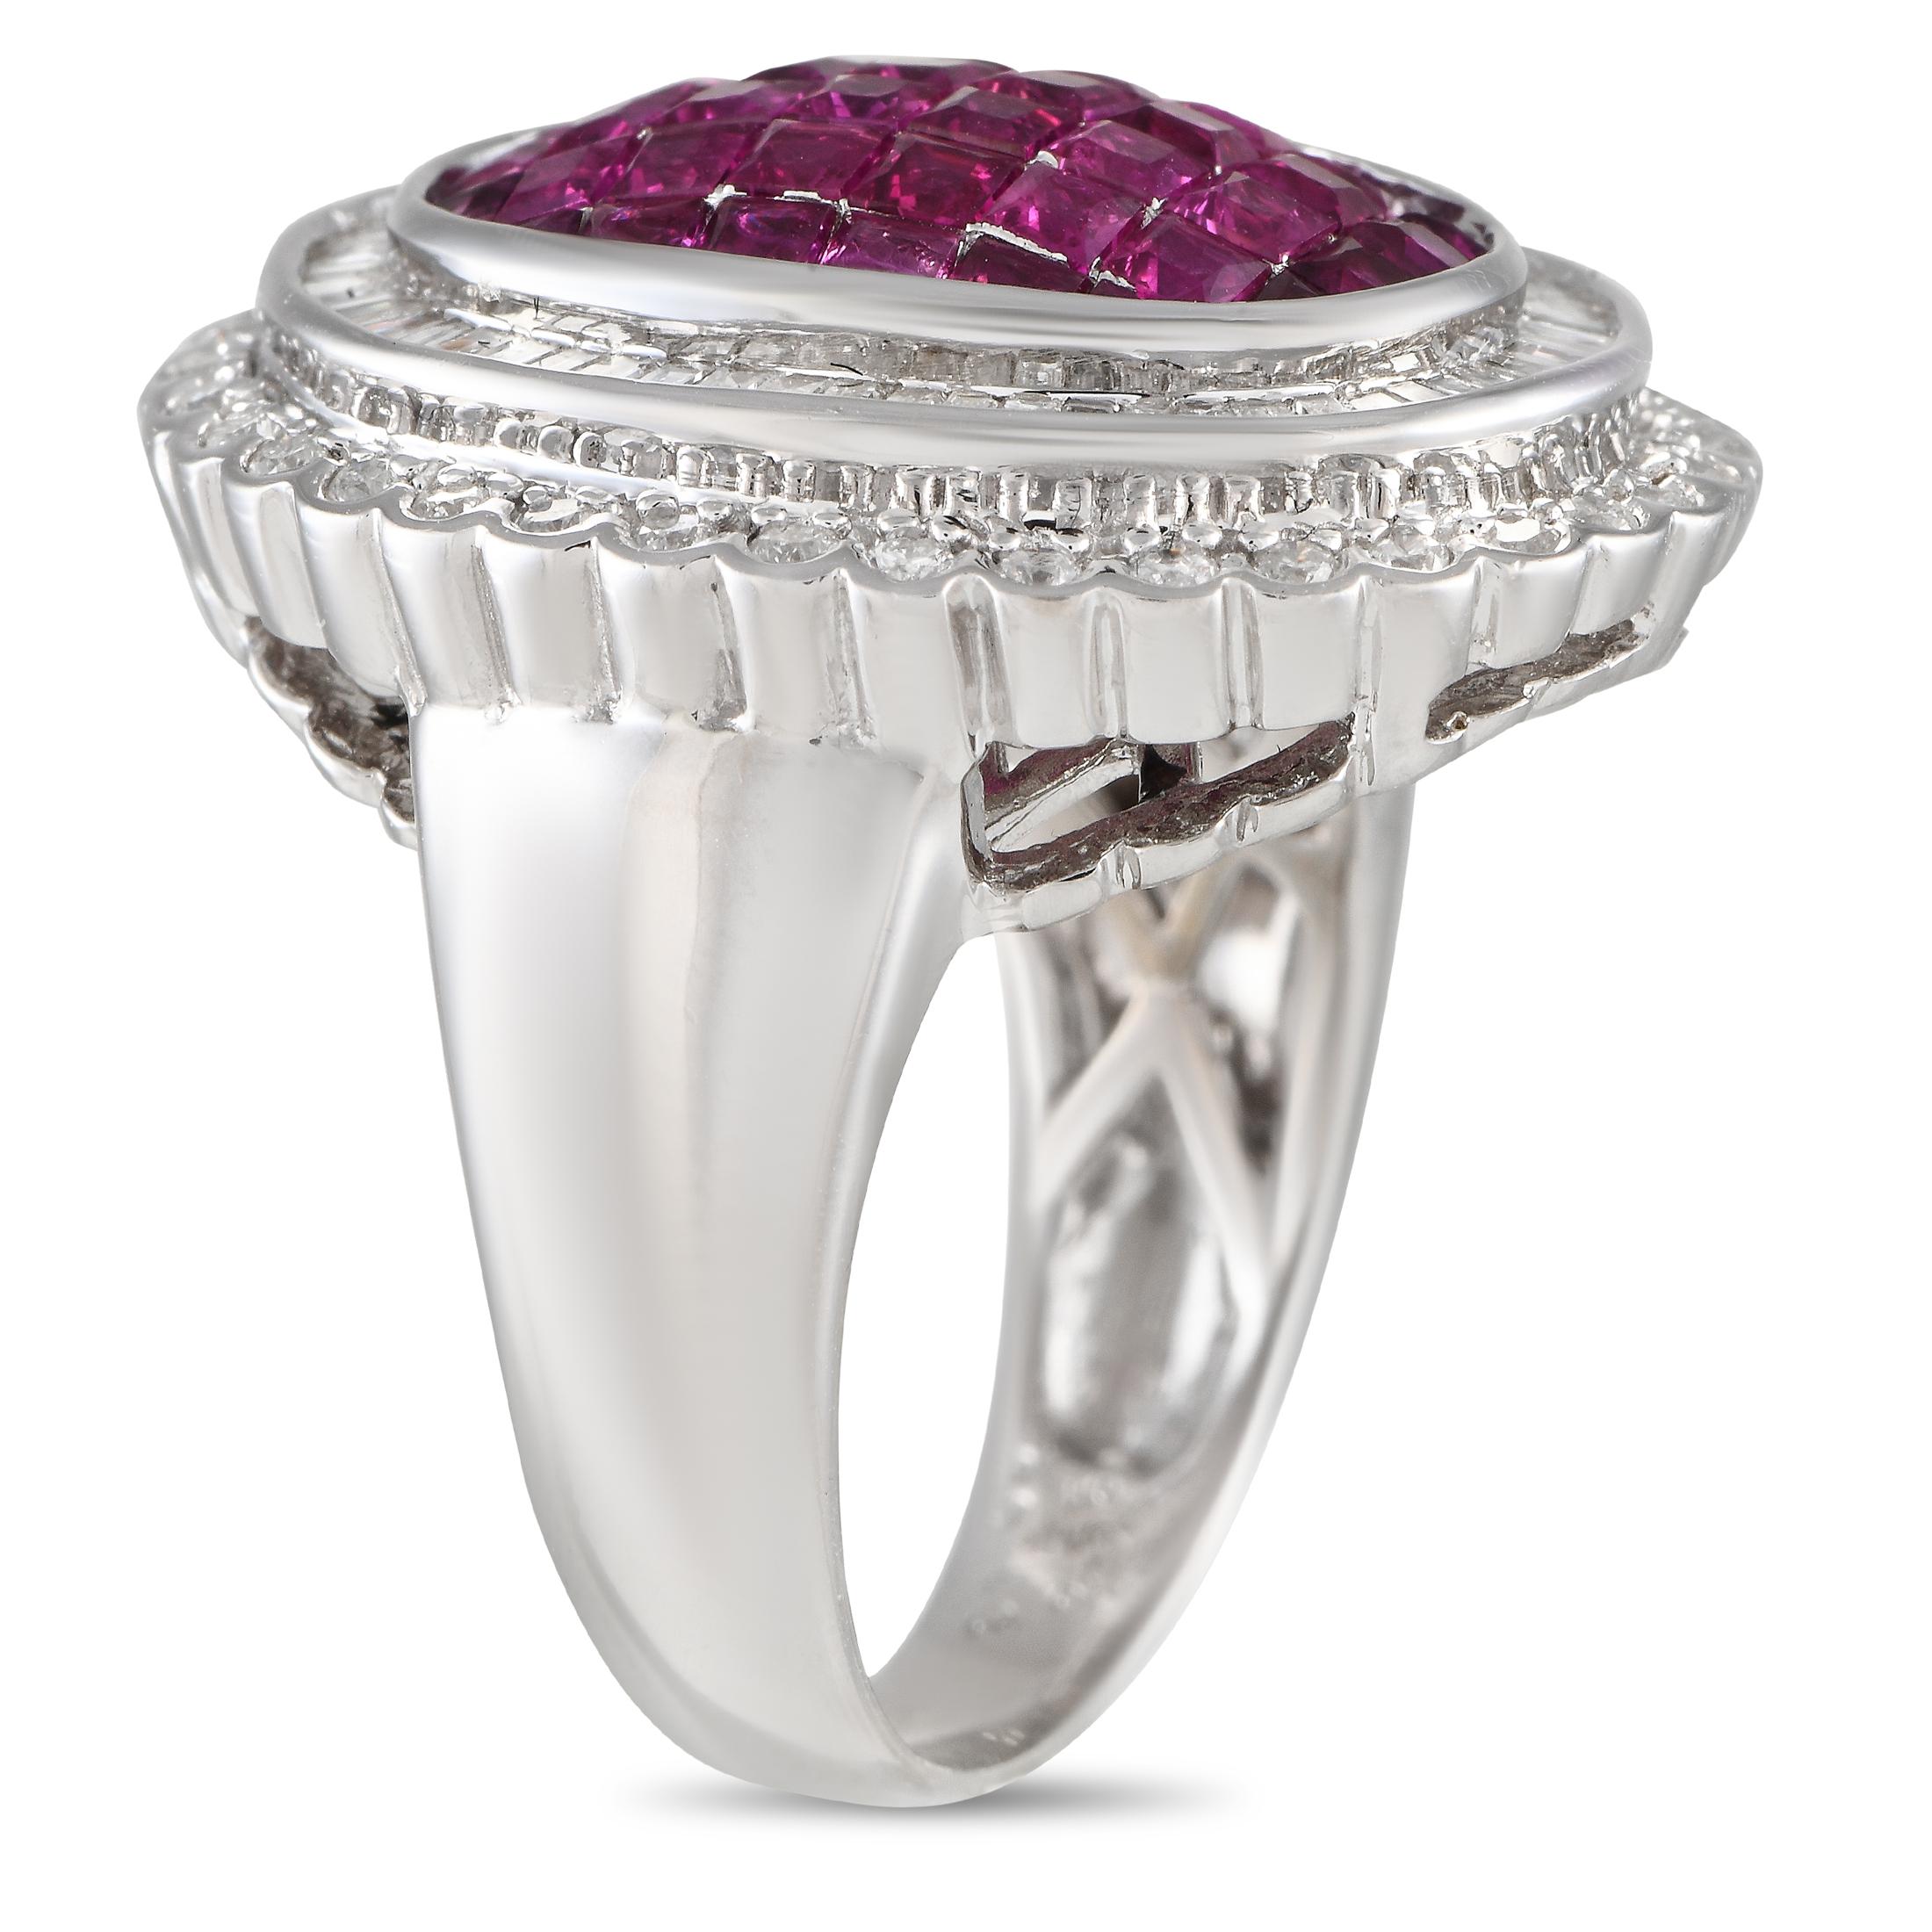 Polish your look with elegance and individuality with this cocktail ring. This LB Exclusive piece makes a bold statement with its thick and domed shank, and its domed cluster of rubies set on an oval bezel. The pinkish-red centerpiece holds rubies